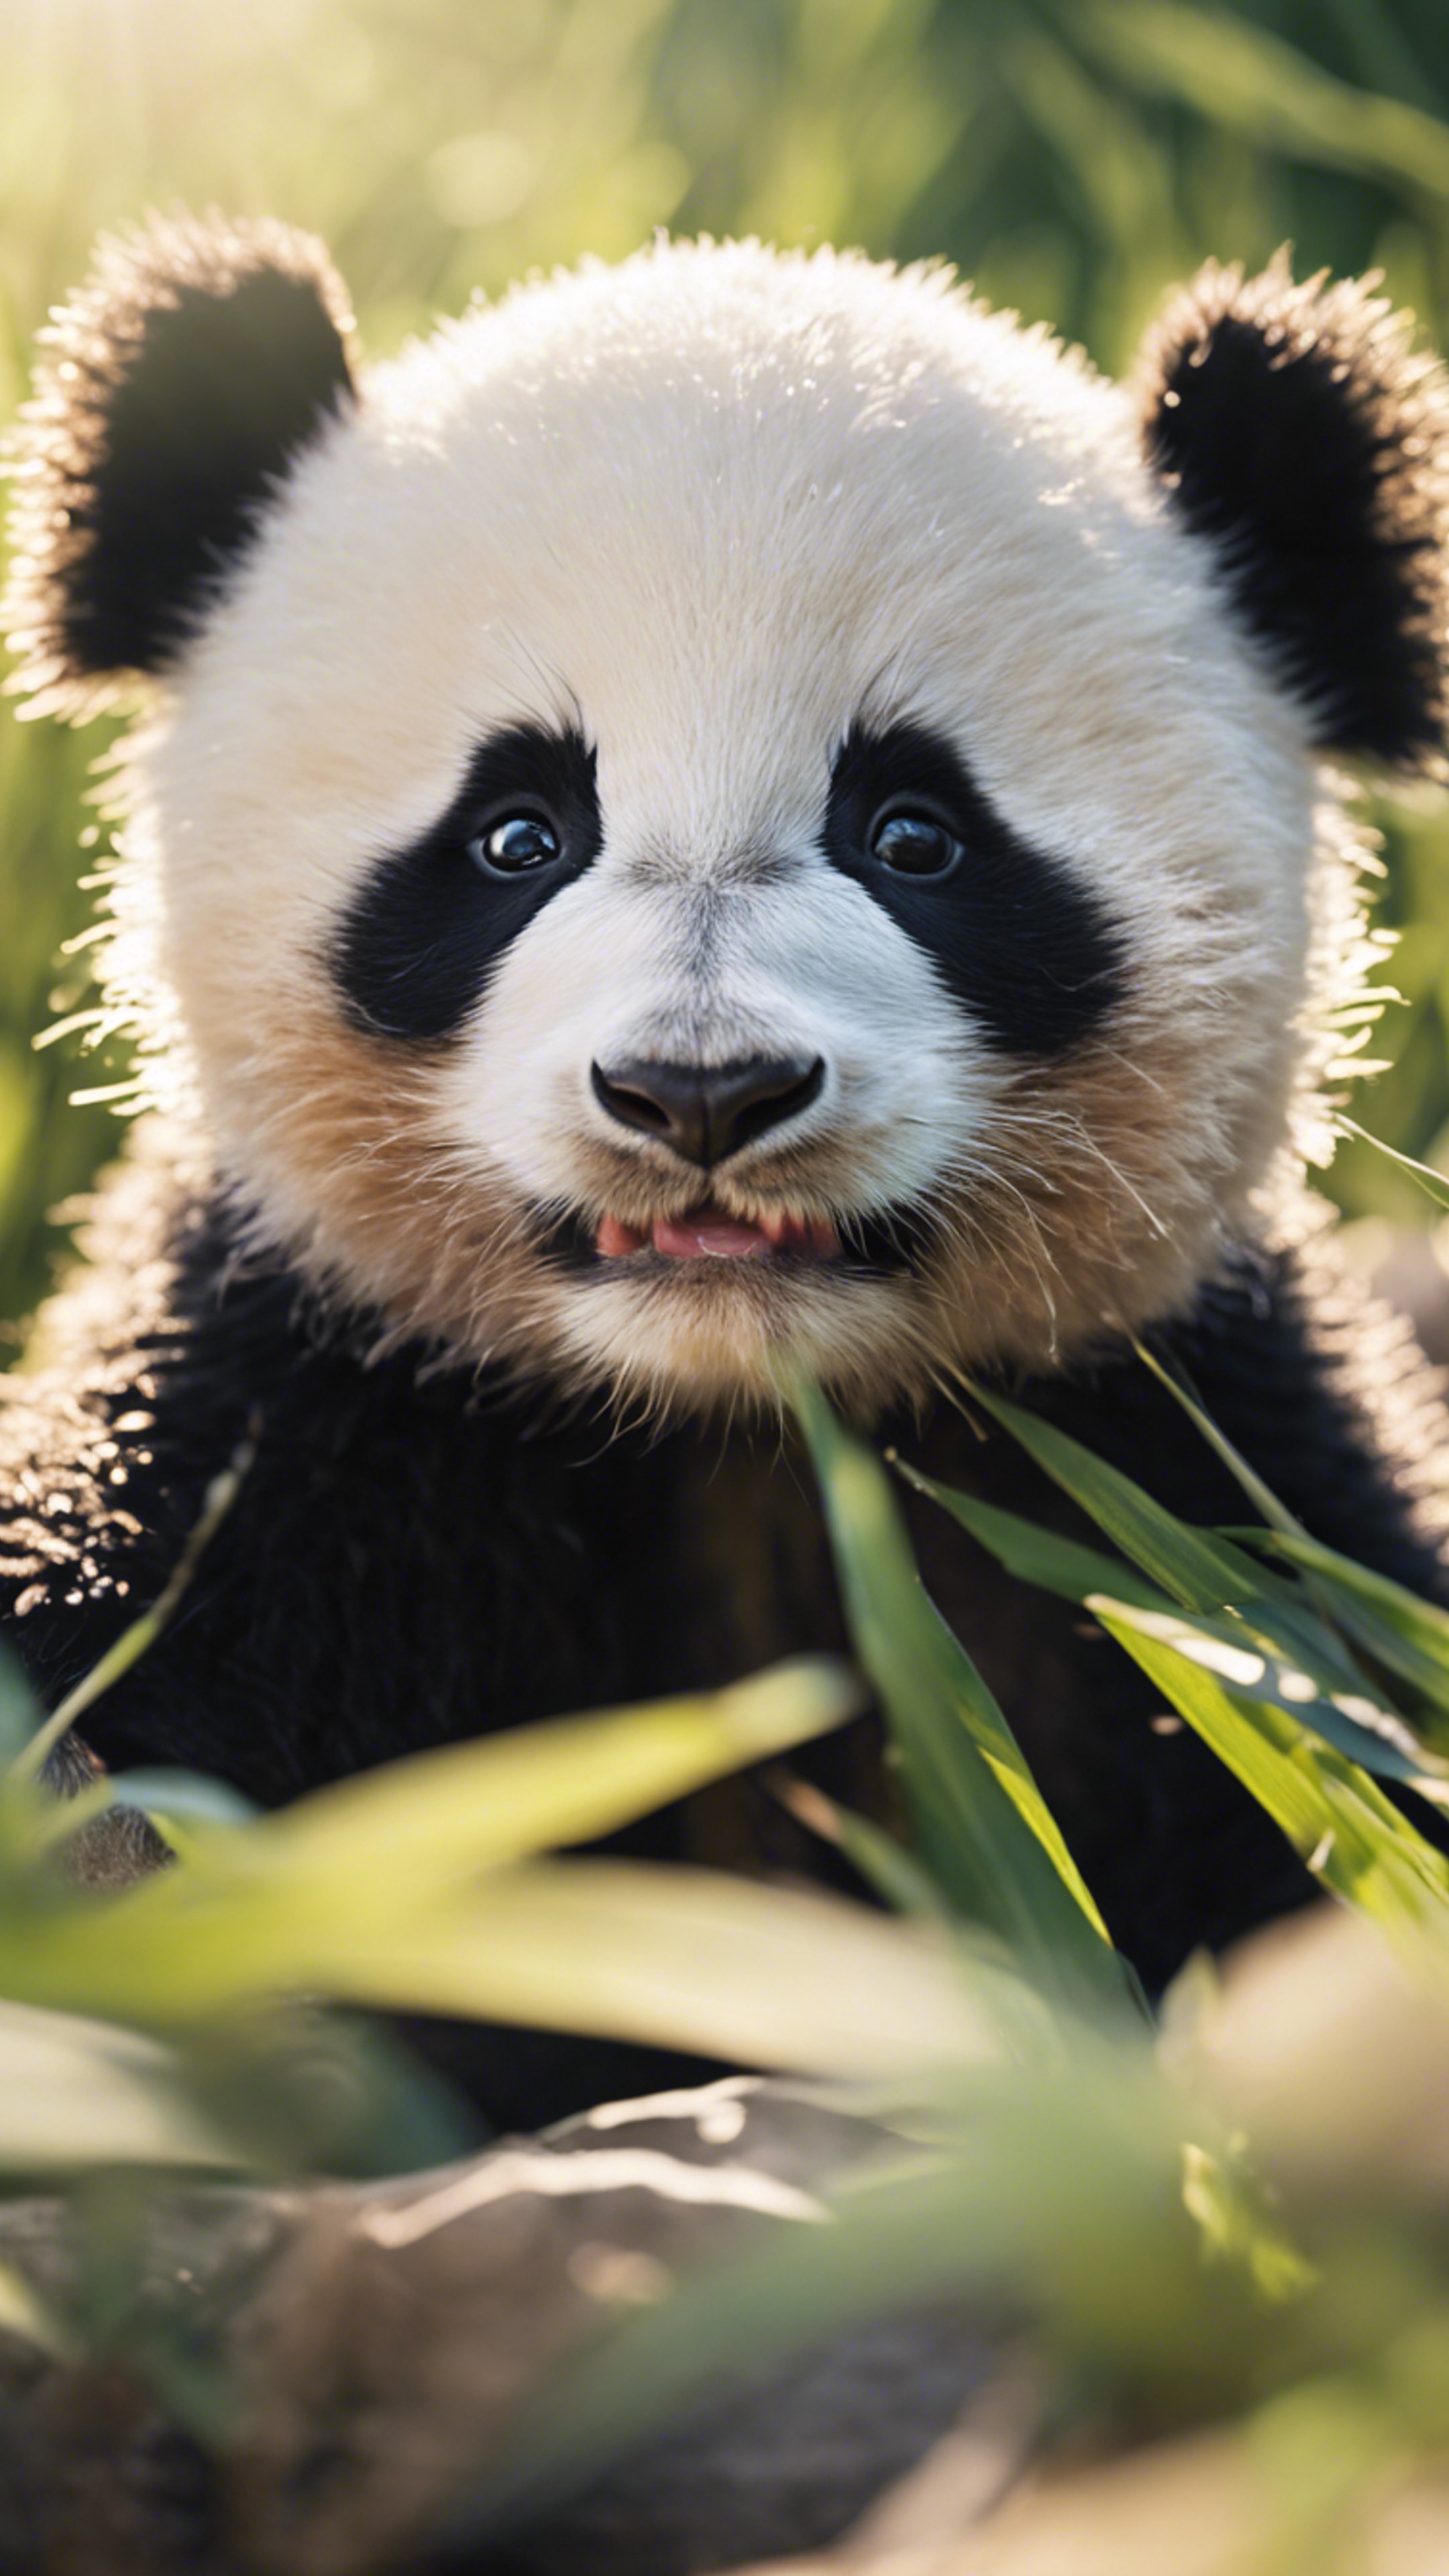 A cheeky panda cub pulling a funny face, under the warm and inviting summer sun. Behang[260c49d866ff4dc685e3]